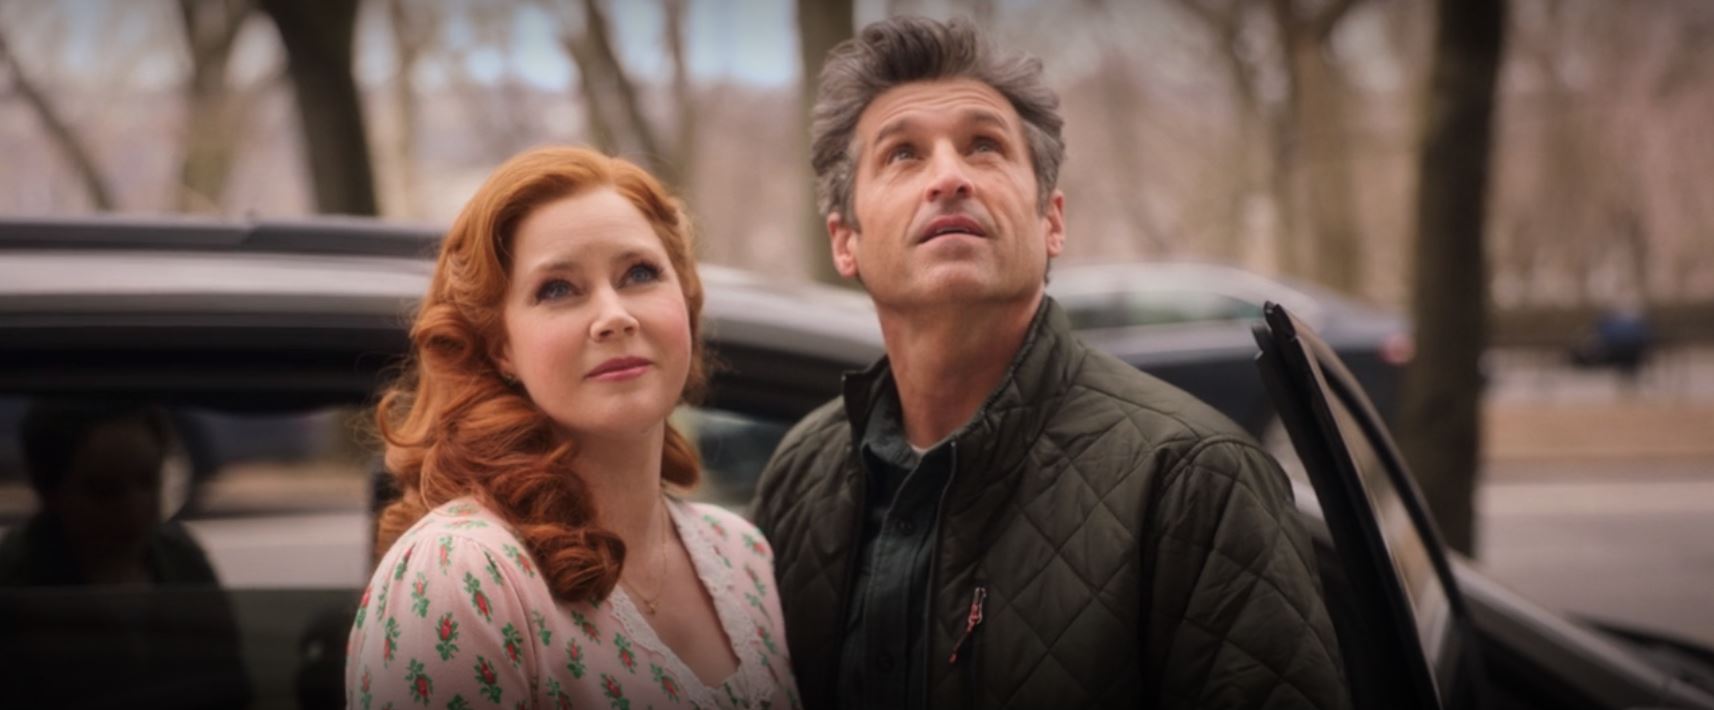 Disenchanted movie Amy Adams as Giselle and Patrick Dempsey as Robert